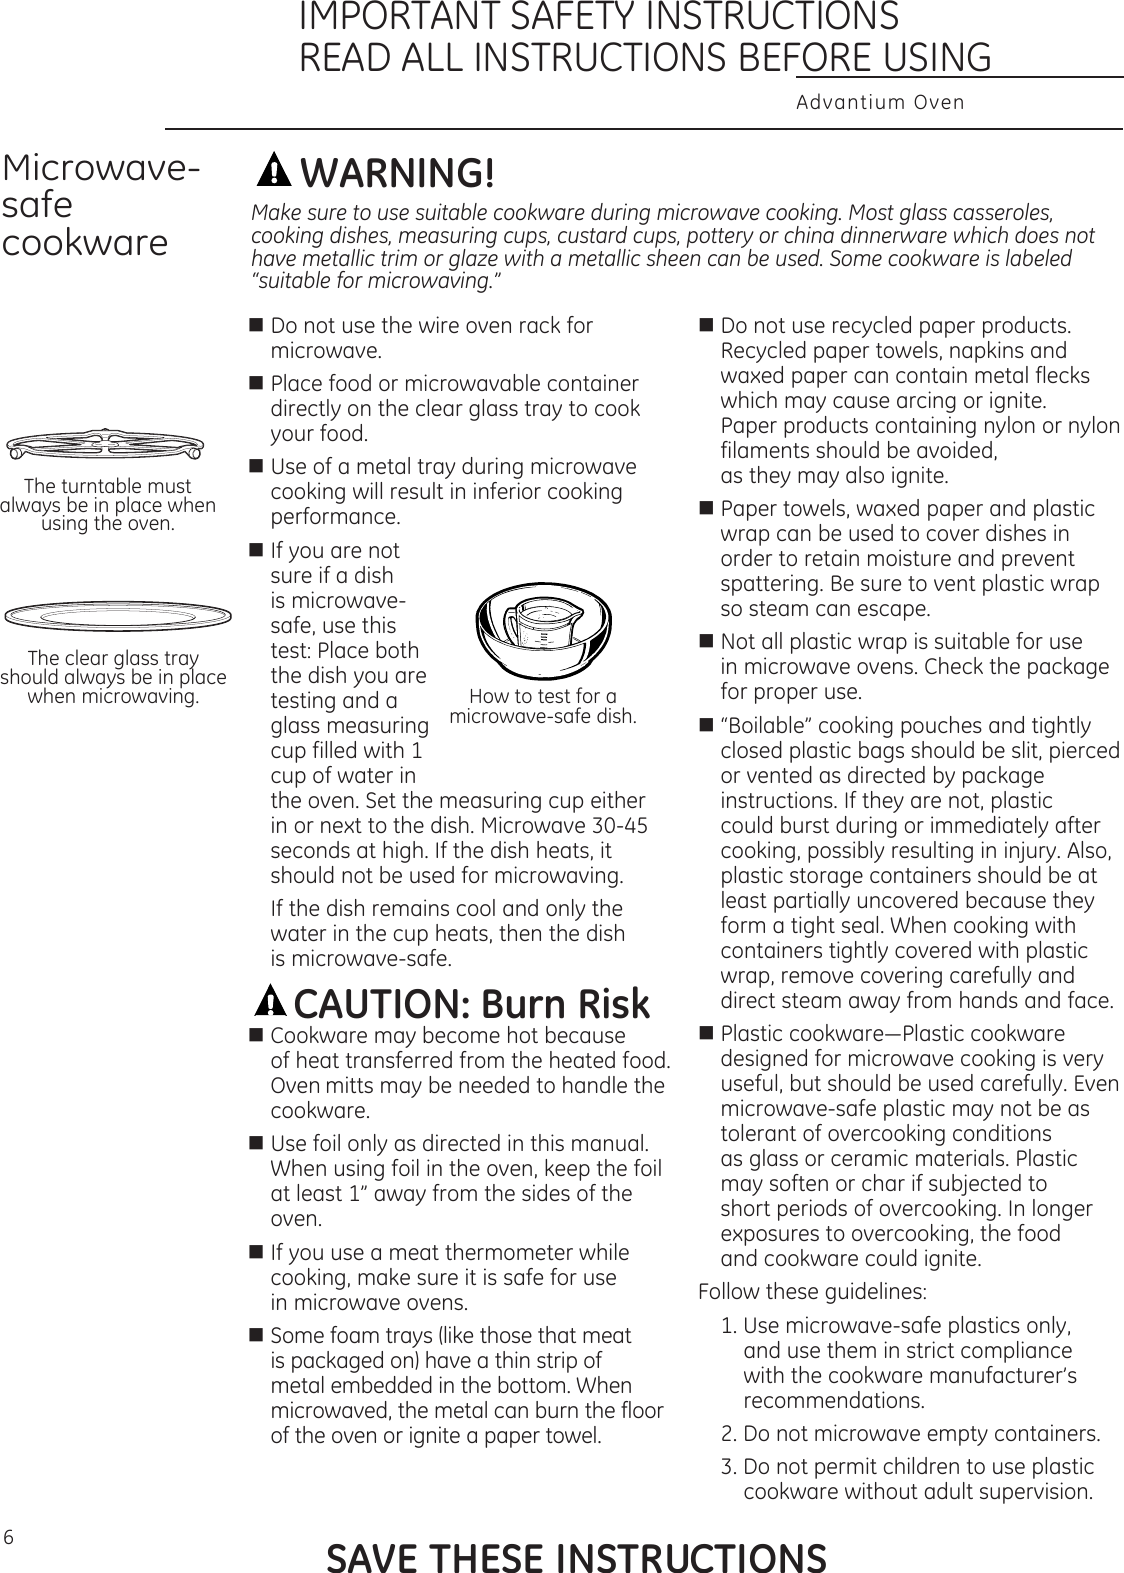 6WARNING!n  Do not use the wire oven rack for microwave.n  Place food or microwavable container directly on the clear glass tray to cook your food.n Use of a metal tray during microwave cooking will result in inferior cooking performance.n If you are not sure if a dish is microwave-safe, use this test: Place both the dish you are testing and a glass measuring cup filled with 1 cup of water in the oven. Set the measuring cup either in or next to the dish. Microwave 30-45 seconds at high. If the dish heats, it should not be used for microwaving.  If the dish remains cool and only the water in the cup heats, then the dish  is microwave-safe.CAUTION: Burn Riskn Cookware may become hot because of heat transferred from the heated food. Oven mitts may be needed to handle the cookware.n Use foil only as directed in this manual. When using foil in the oven, keep the foil at least 1” away from the sides of the oven.n If you use a meat thermometer while cooking, make sure it is safe for use  in microwave ovens.n Some foam trays (like those that meat is packaged on) have a thin strip of metal embedded in the bottom. When microwaved, the metal can burn the floor of the oven or ignite a paper towel.n Do not use recycled paper products. Recycled paper towels, napkins and waxed paper can contain metal flecks which may cause arcing or ignite. Paper products containing nylon or nylon filaments should be avoided, as they may also ignite.n Paper towels, waxed paper and plastic wrap can be used to cover dishes in order to retain moisture and prevent spattering. Be sure to vent plastic wrap so steam can escape. n Not all plastic wrap is suitable for use in microwave ovens. Check the package for proper use.n “Boilable” cooking pouches and tightly closed plastic bags should be slit, pierced or vented as directed by package instructions. If they are not, plastic could burst during or immediately after cooking, possibly resulting in injury. Also, plastic storage containers should be at least partially uncovered because they form a tight seal. When cooking with containers tightly covered with plastic wrap, remove covering carefully and direct steam away from hands and face.nPlasticcookware—Plasticcookwaredesigned for microwave cooking is very useful, but should be used carefully. Even microwave-safe plastic may not be as tolerant of overcooking conditions  as glass or ceramic materials. Plastic may soften or char if subjected to short periods of overcooking. In longer exposures to overcooking, the food  and cookware could ignite. Follow these guidelines: 1. Use microwave-safe plastics only,  and use them in strict compliance  with the cookware manufacturer’s recommendations. 2. Do not microwave empty containers. 3. Do not permit children to use plastic cookware without adult supervision.Microwave-safe cookwareThe turntable must always be in place when using the oven.The clear glass tray should always be in place when microwaving.Make sure to use suitable cookware during microwave cooking. Most glass casseroles, cooking dishes, measuring cups, custard cups, pottery or china dinnerware which does not have metallic trim or glaze with a metallic sheen can be used. Some cookware is labeled “suitable for microwaving.”How to test for a microwave-safe dish.SAVE THESE INSTRUCTIONSAdvantium OvenIMPORTANT SAFETY INSTRUCTIONSREAD ALL INSTRUCTIONS BEFORE USING